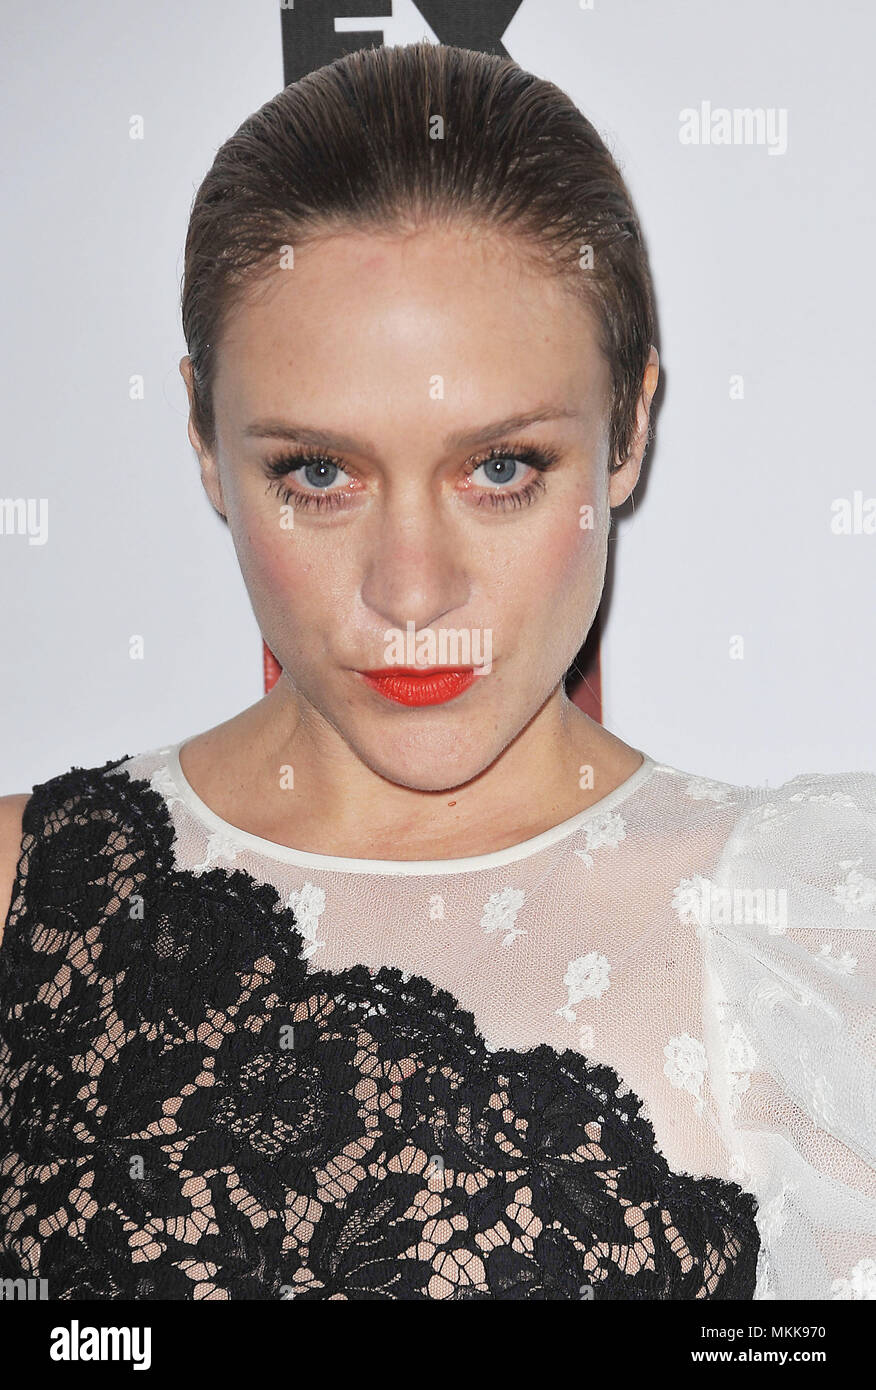 Chloe Sevigny  at the American Horror Story  Asylum Premiere at the Paramount Studio Theatre In Los Angeles.Chloe Sevigny  166 Red Carpet Event, Vertical, USA, Film Industry, Celebrities,  Photography, Bestof, Arts Culture and Entertainment, Topix Celebrities fashion /  Vertical, Best of, Event in Hollywood Life - California,  Red Carpet and backstage, USA, Film Industry, Celebrities,  movie celebrities, TV celebrities, Music celebrities, Photography, Bestof, Arts Culture and Entertainment,  Topix, headshot, vertical, one person,, from the year , 2012, inquiry tsuni@Gamma-USA.com Stock Photo